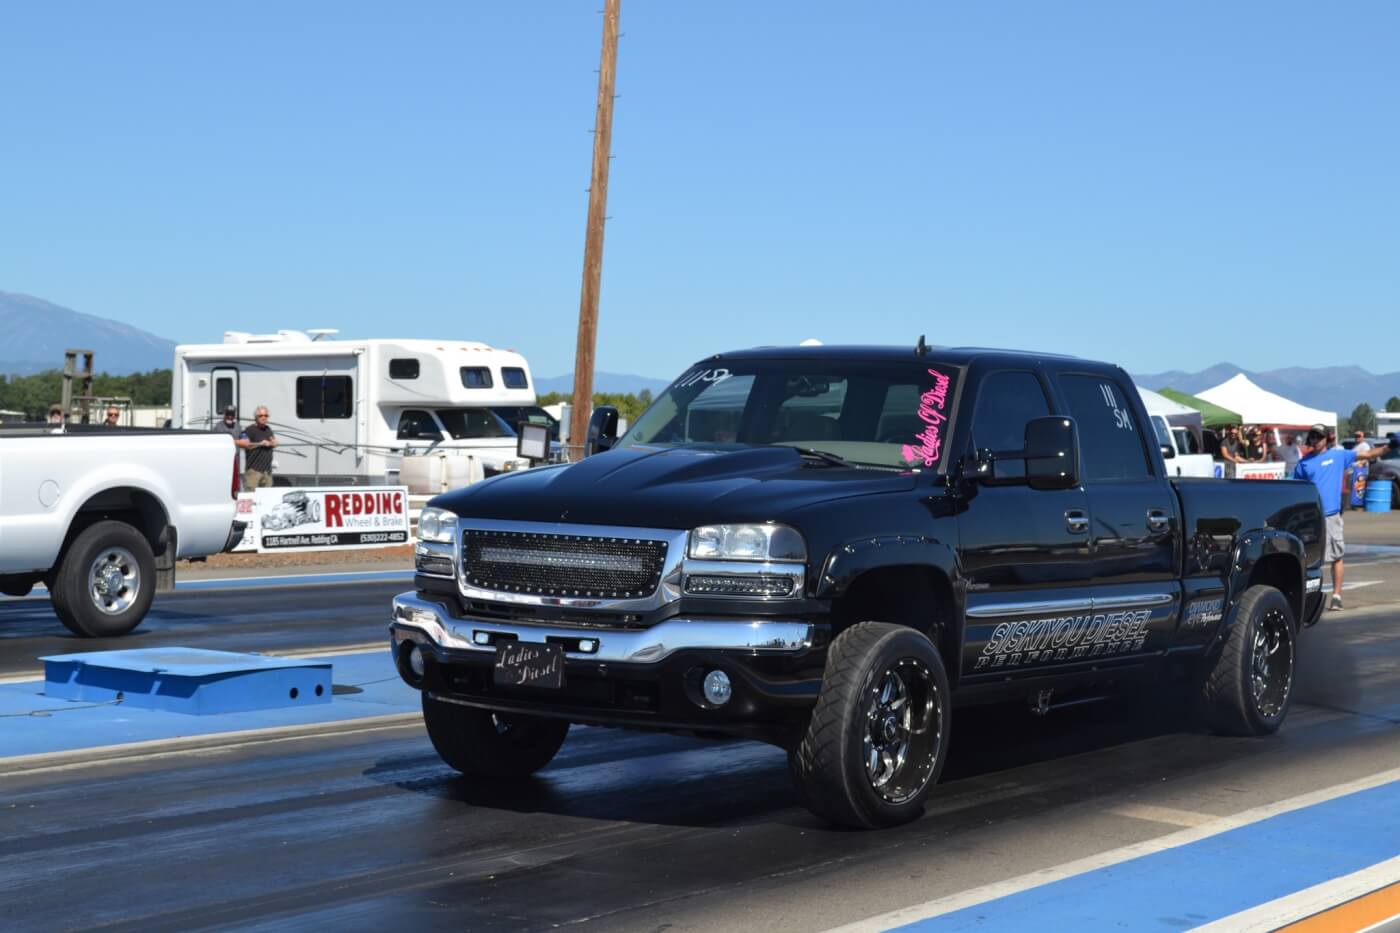 Plenty of hot street trucks were there to hit the track, like Kat Ray's mildly modified Duramax, which went high 12s in Redding. Not bad for its limited modifications.